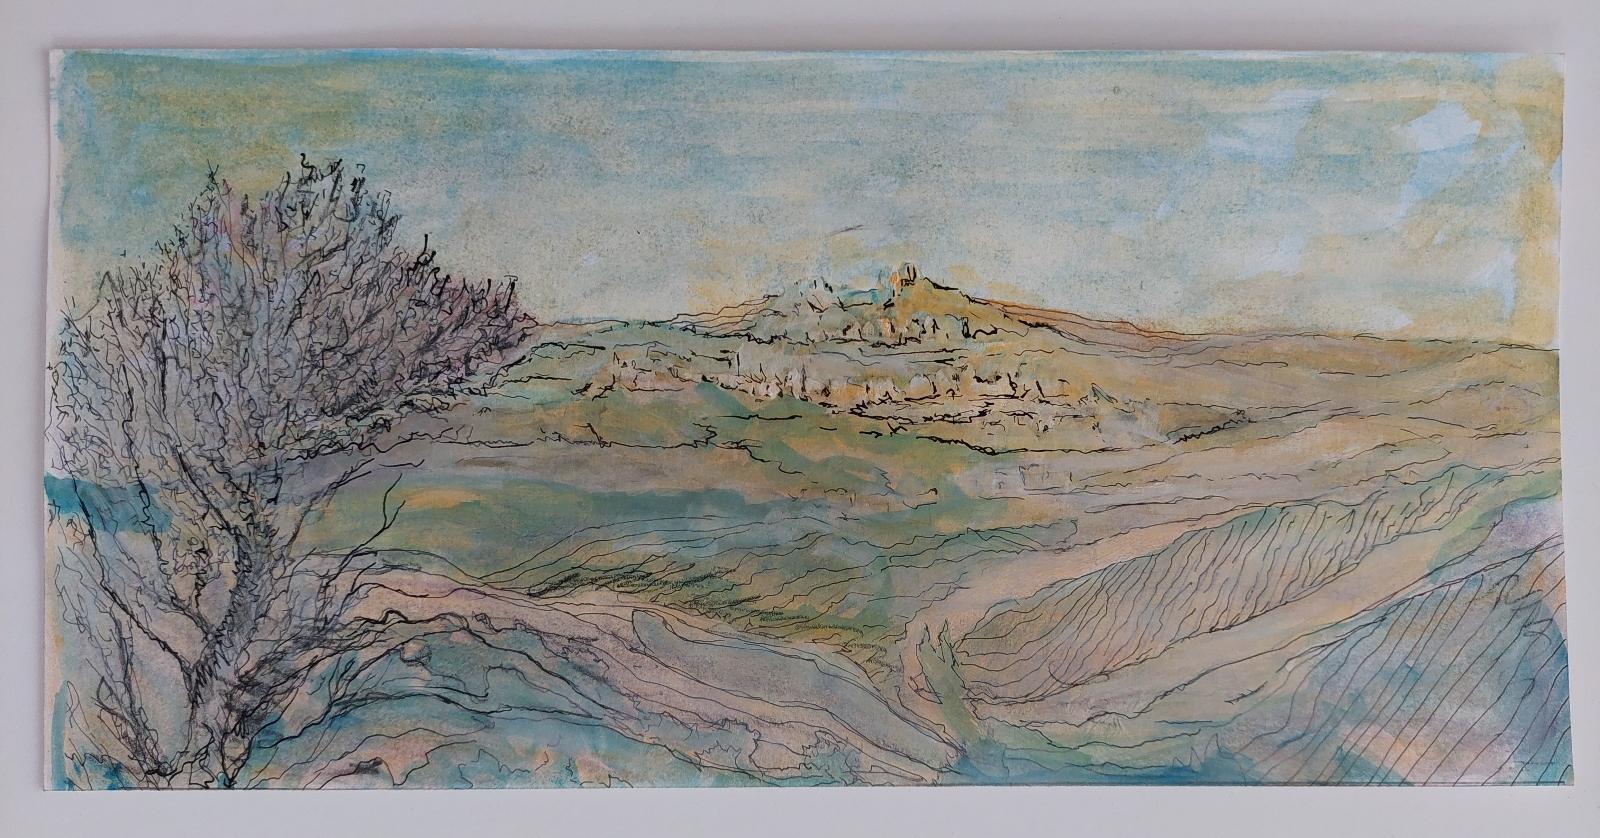 Watercolor and ink panoramic South of France Landscape
by Bernard Labbe (French mid 20th century)
Original watercolor and ink on paper
Size: 5.75 x 11.75 inches
Unsigned , stamped verso
Condition: very good and ready to be